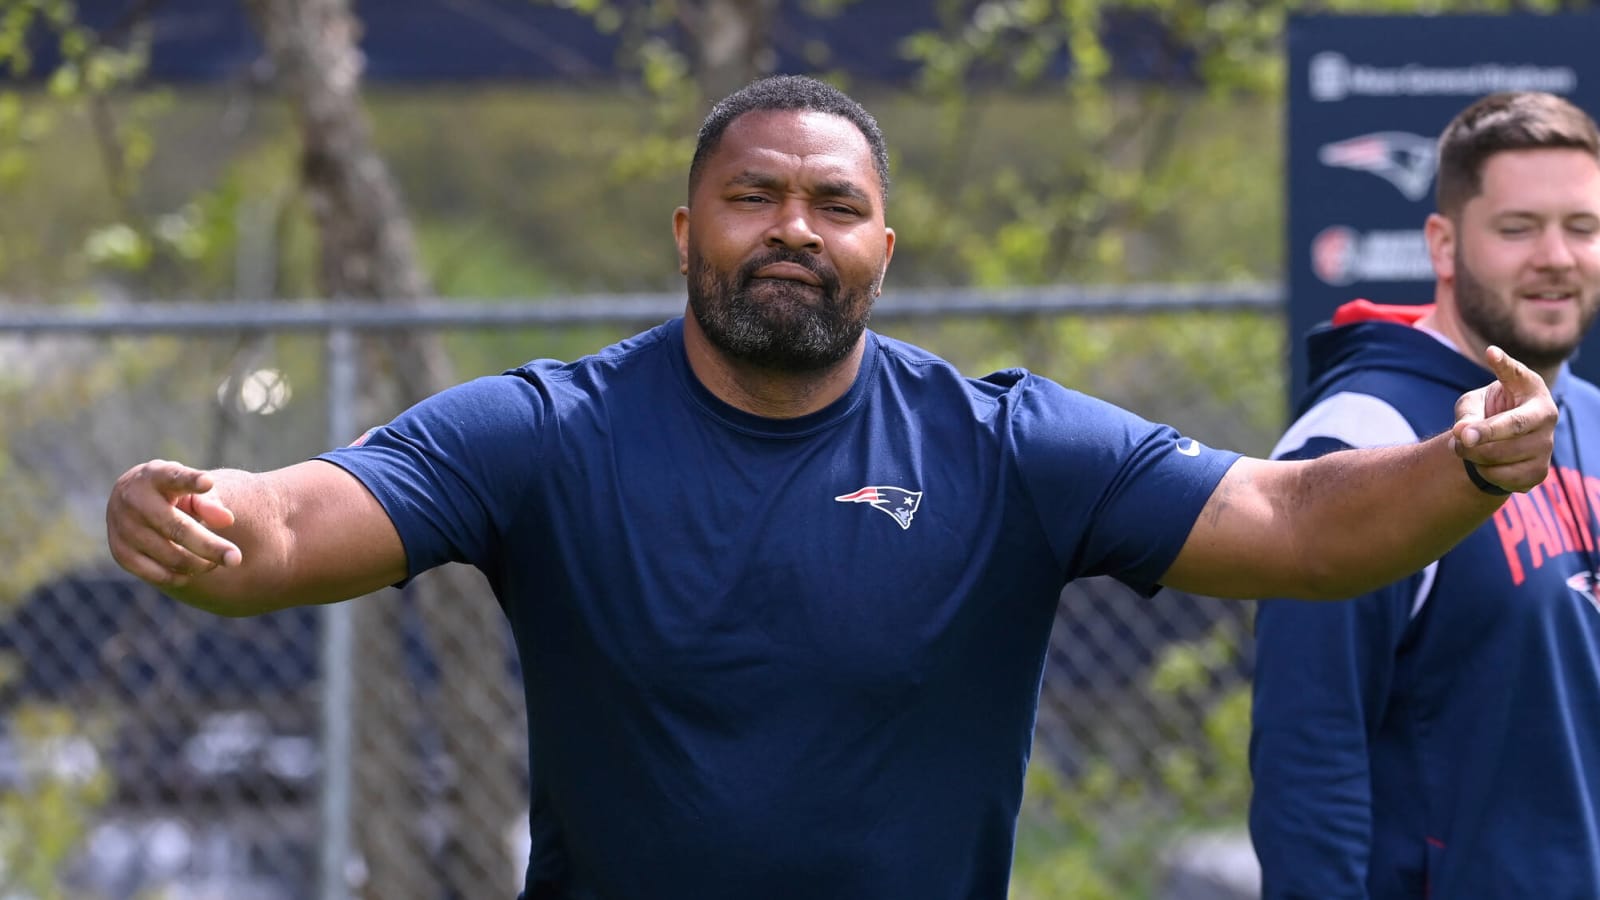  Way-too-early first impressions from Patriots rookie camp - Jerod Mayo takes the scenic route